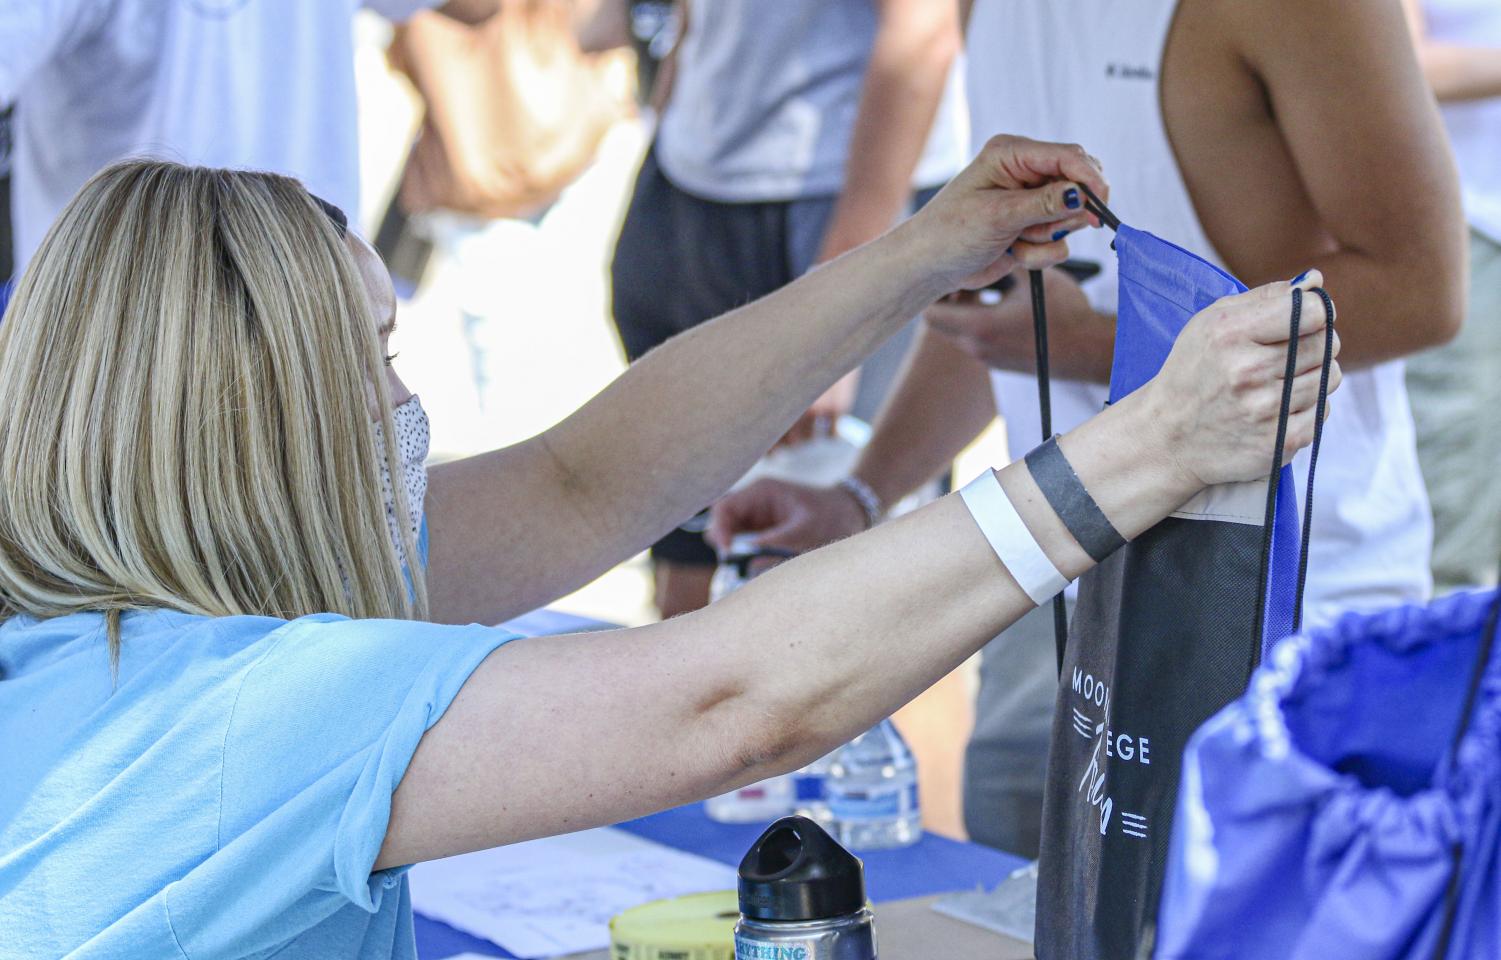 Moorpark College's Student Activities Specialist Kristen Robinson passes out Moorpark College merchandise bags at New Student Welcome Day on Monday, Aug 9, 2021.